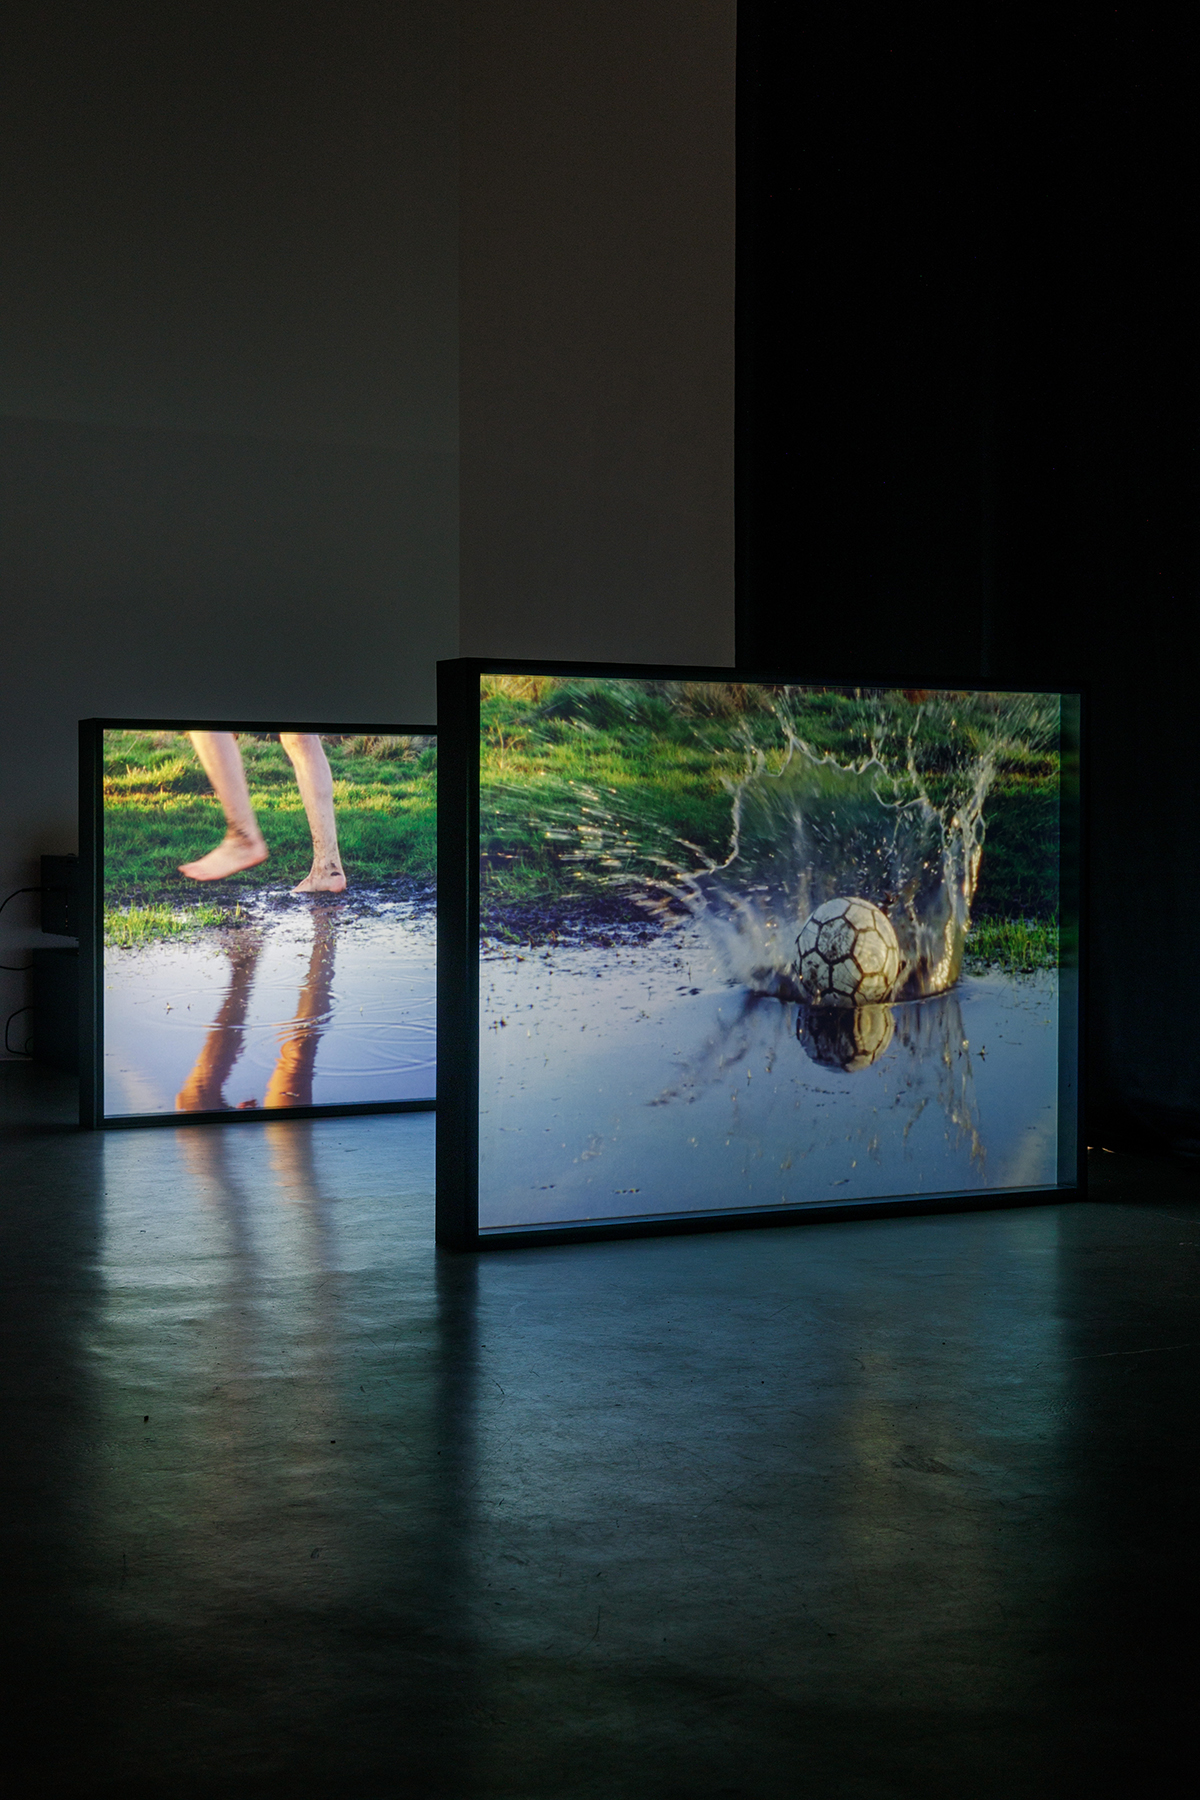 An installation shot of two screens, one depicting a person running through mud, and the other depicting a football in a pond.